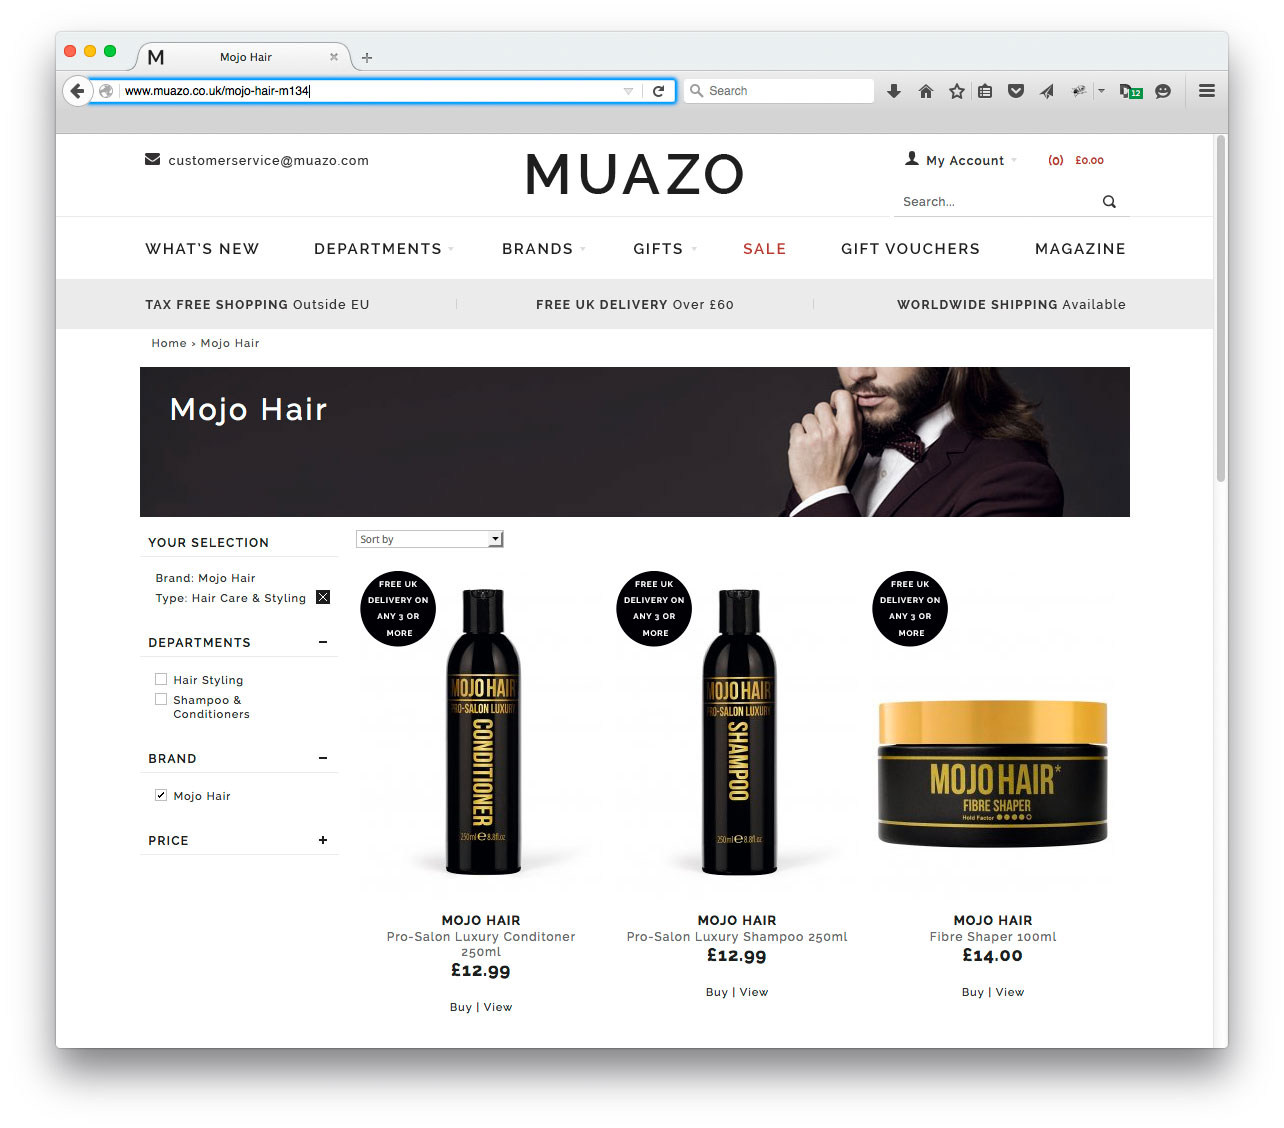 Mojo Hair* is now available from muazo.co.uk